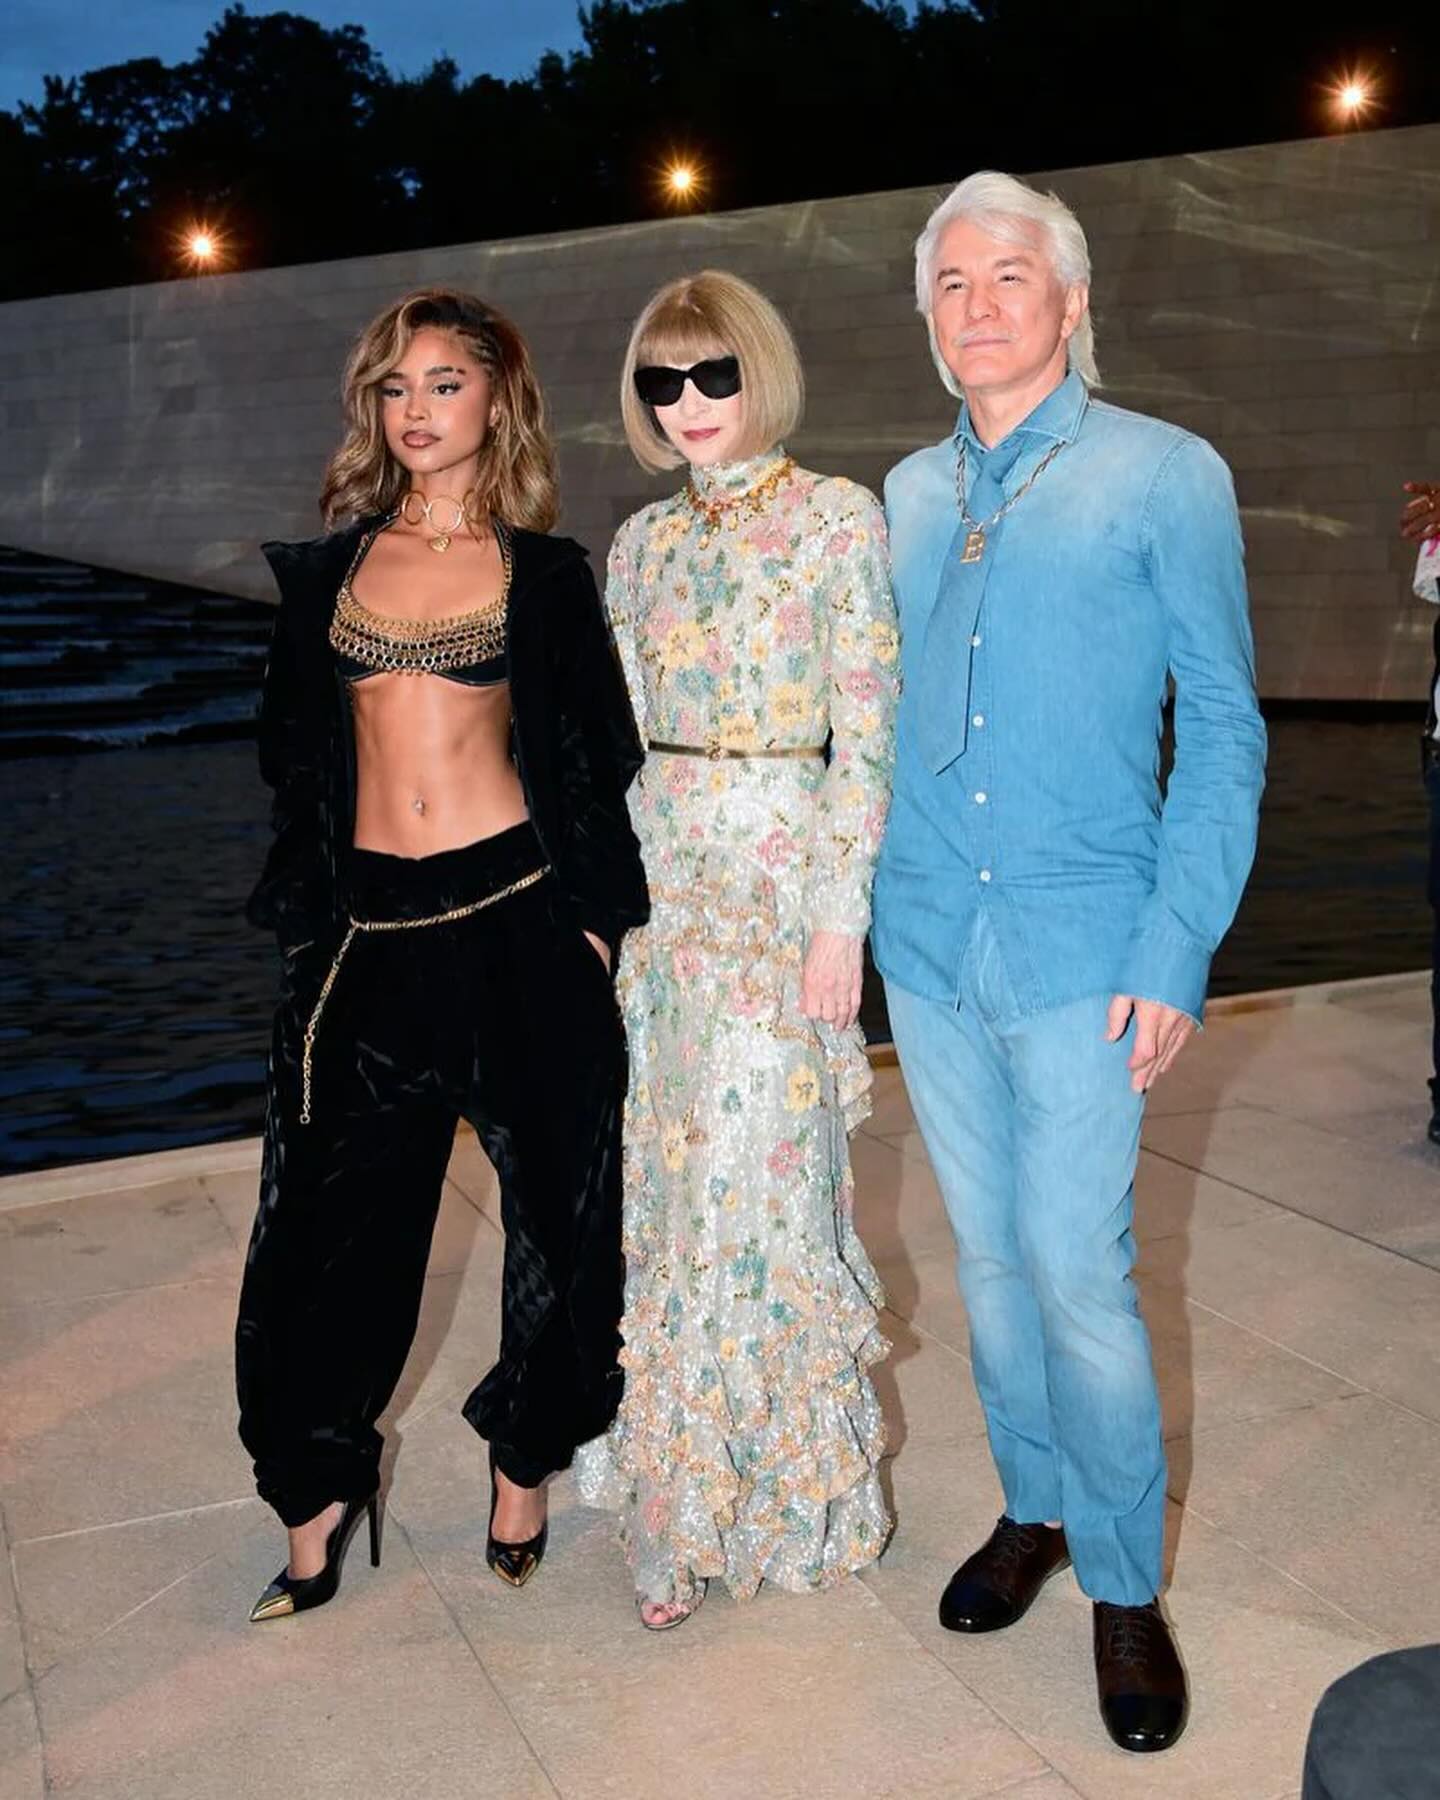 photo-by-anna-wintour-on-july-26-2024-may-be-an-image-of-3-people-1722047318389237033048-1722067453792-17220674542411084432544.jpg